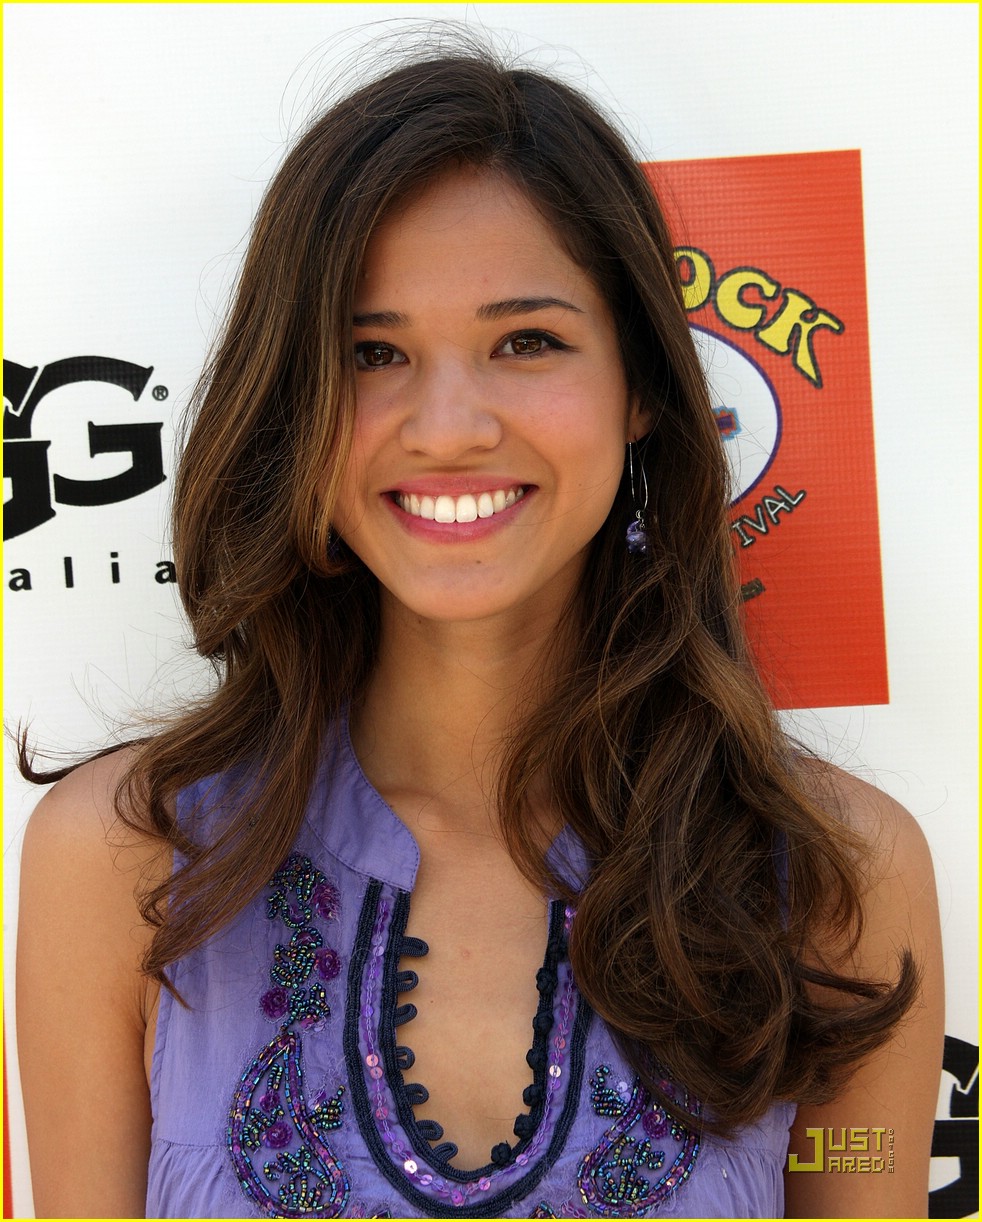 Kelsey Chow. 